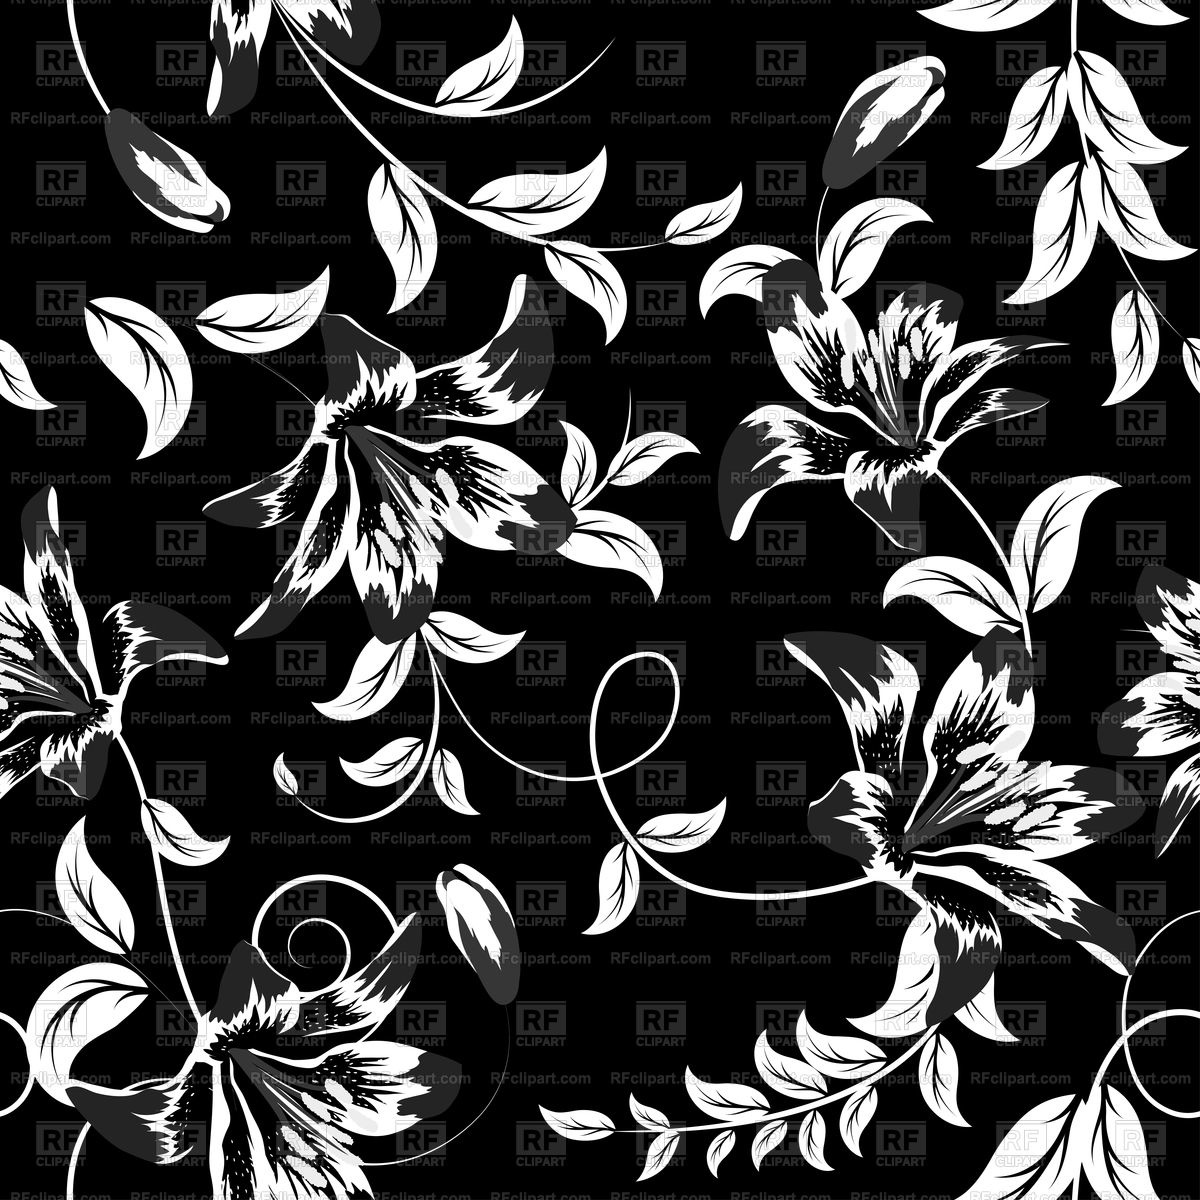 Seamless Black Floral Wallpaper Vector Image Vector - Free Flower Background  Black And White - 1200x1200 Wallpaper 